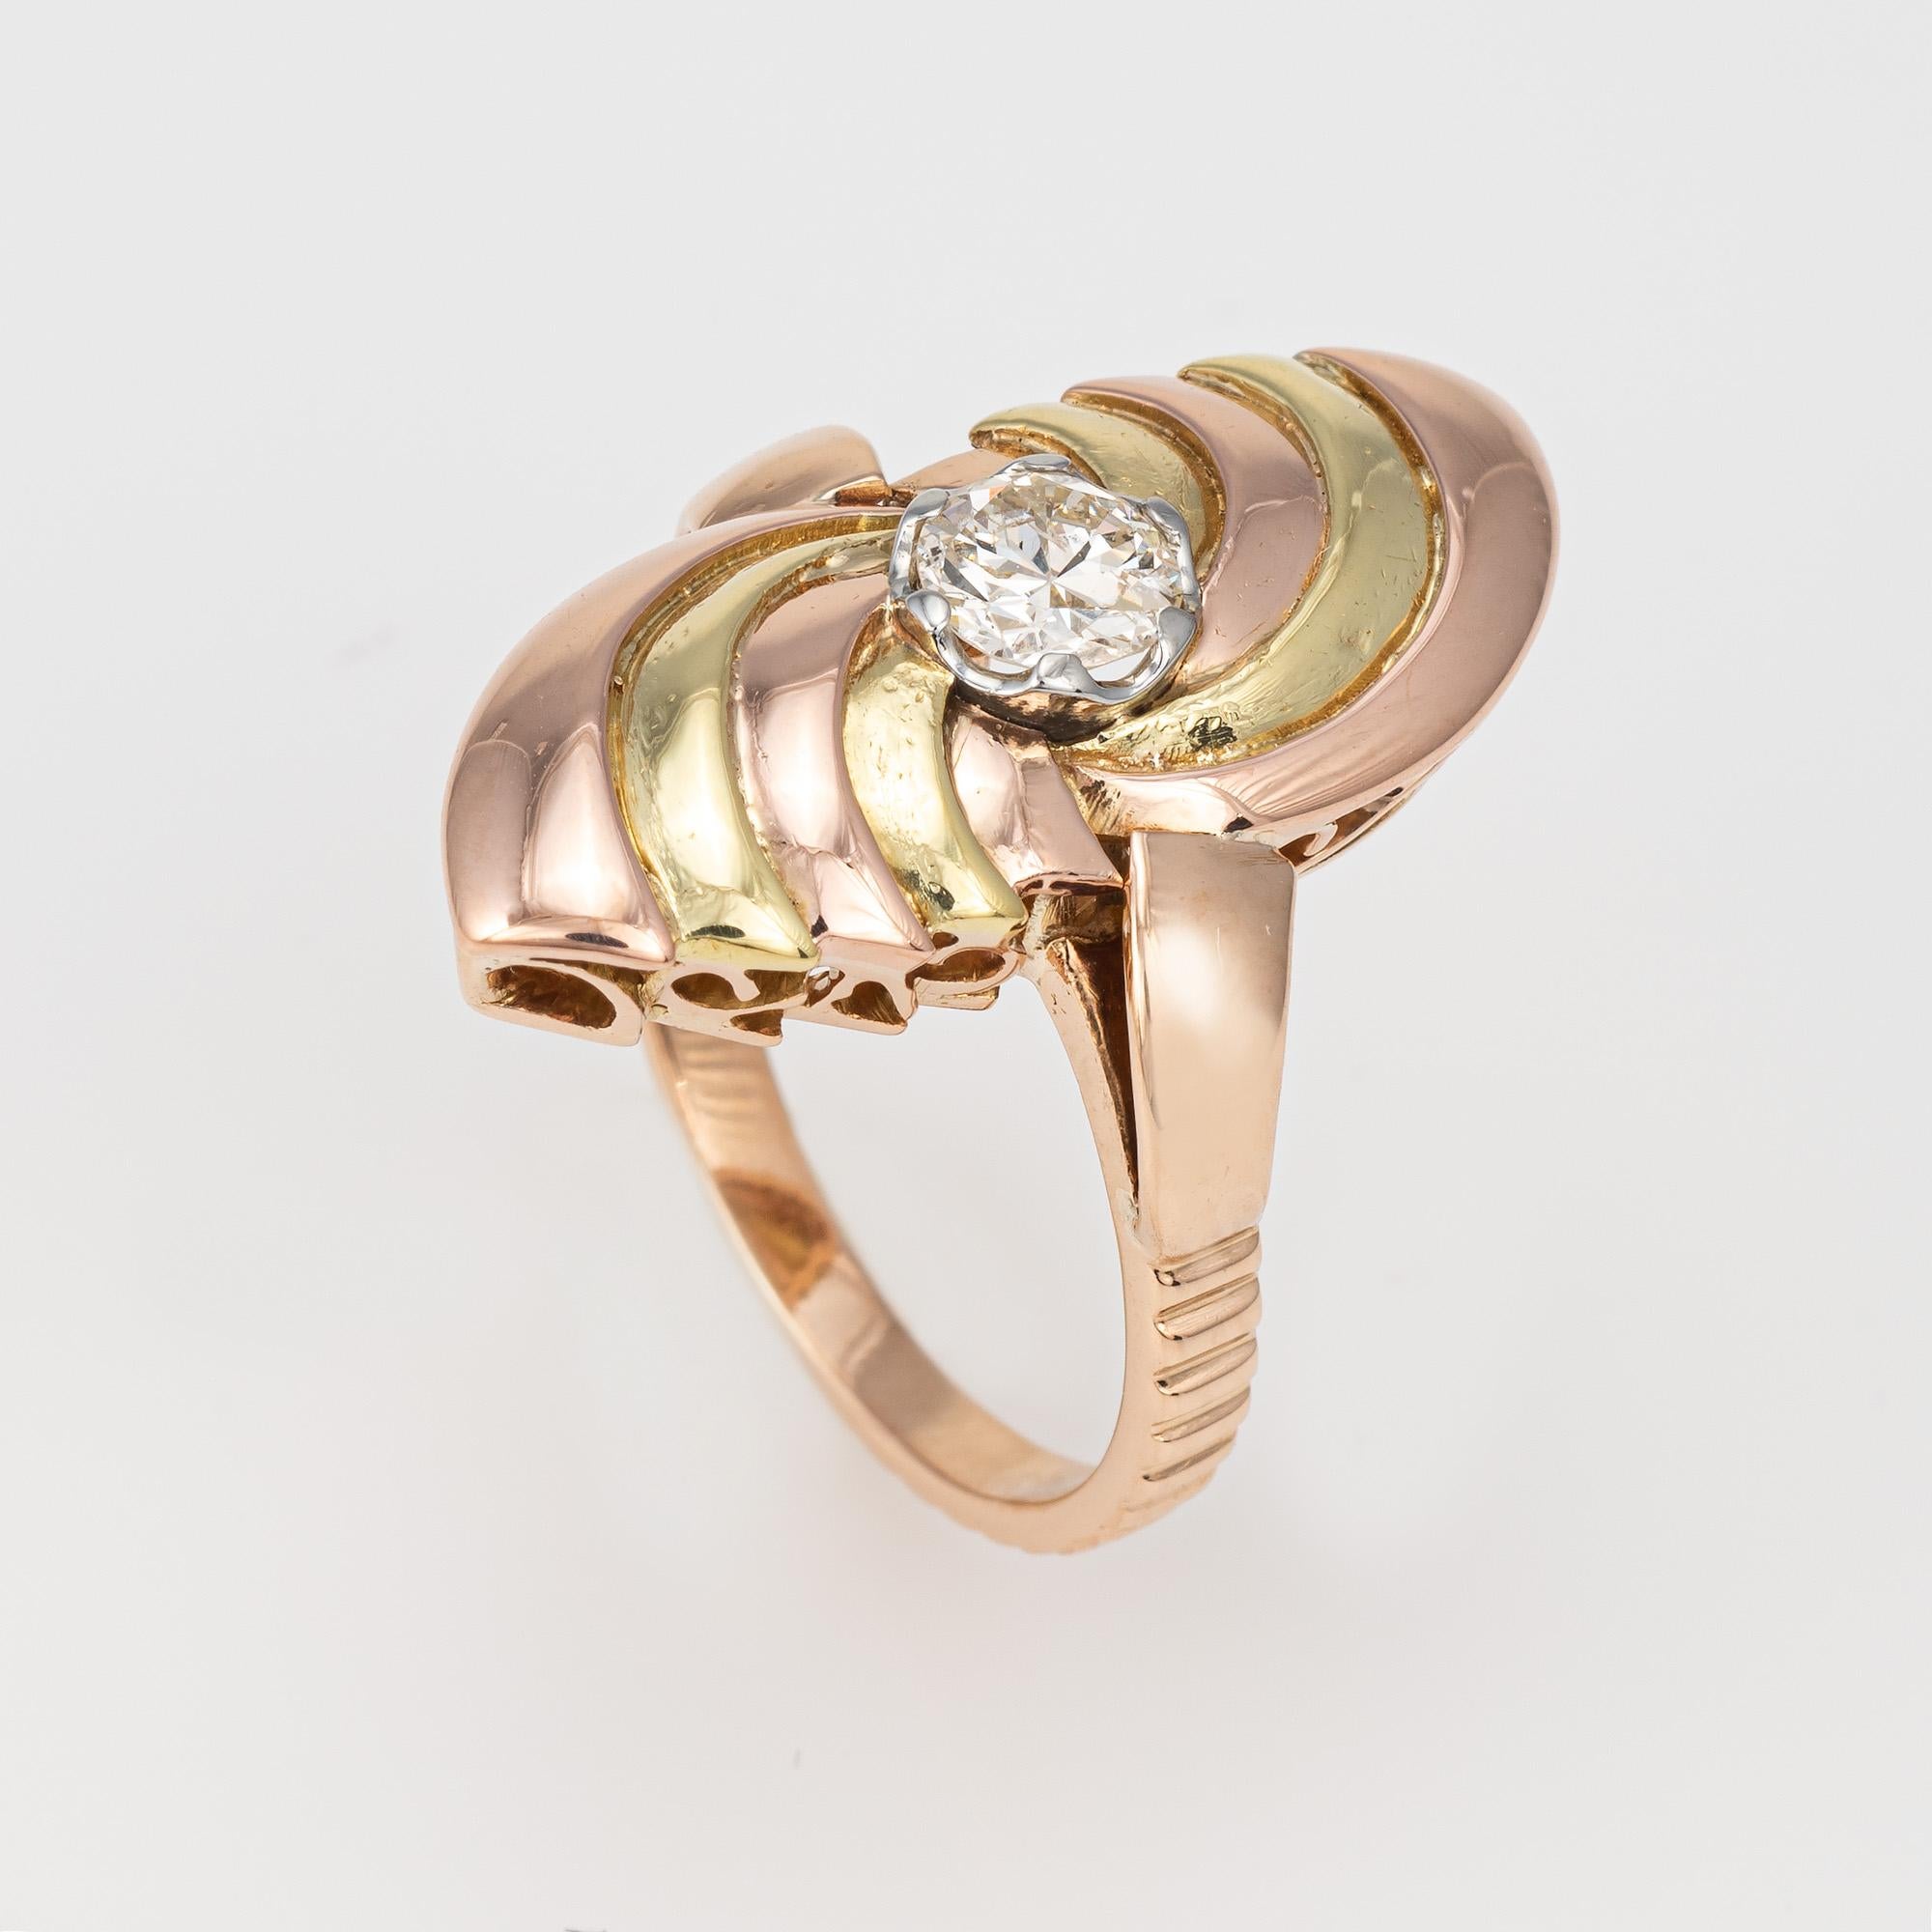 Stylish vintage retro diamond ring (circa 1940s to 1950s) crafted in 18 karat yellow & rose gold. 

Old European cut diamond is estimated at 0.35 carats (estimated at J-K color and SI2-I1 clarity).

Crafted in two-tone yellow & rose gold the ring is